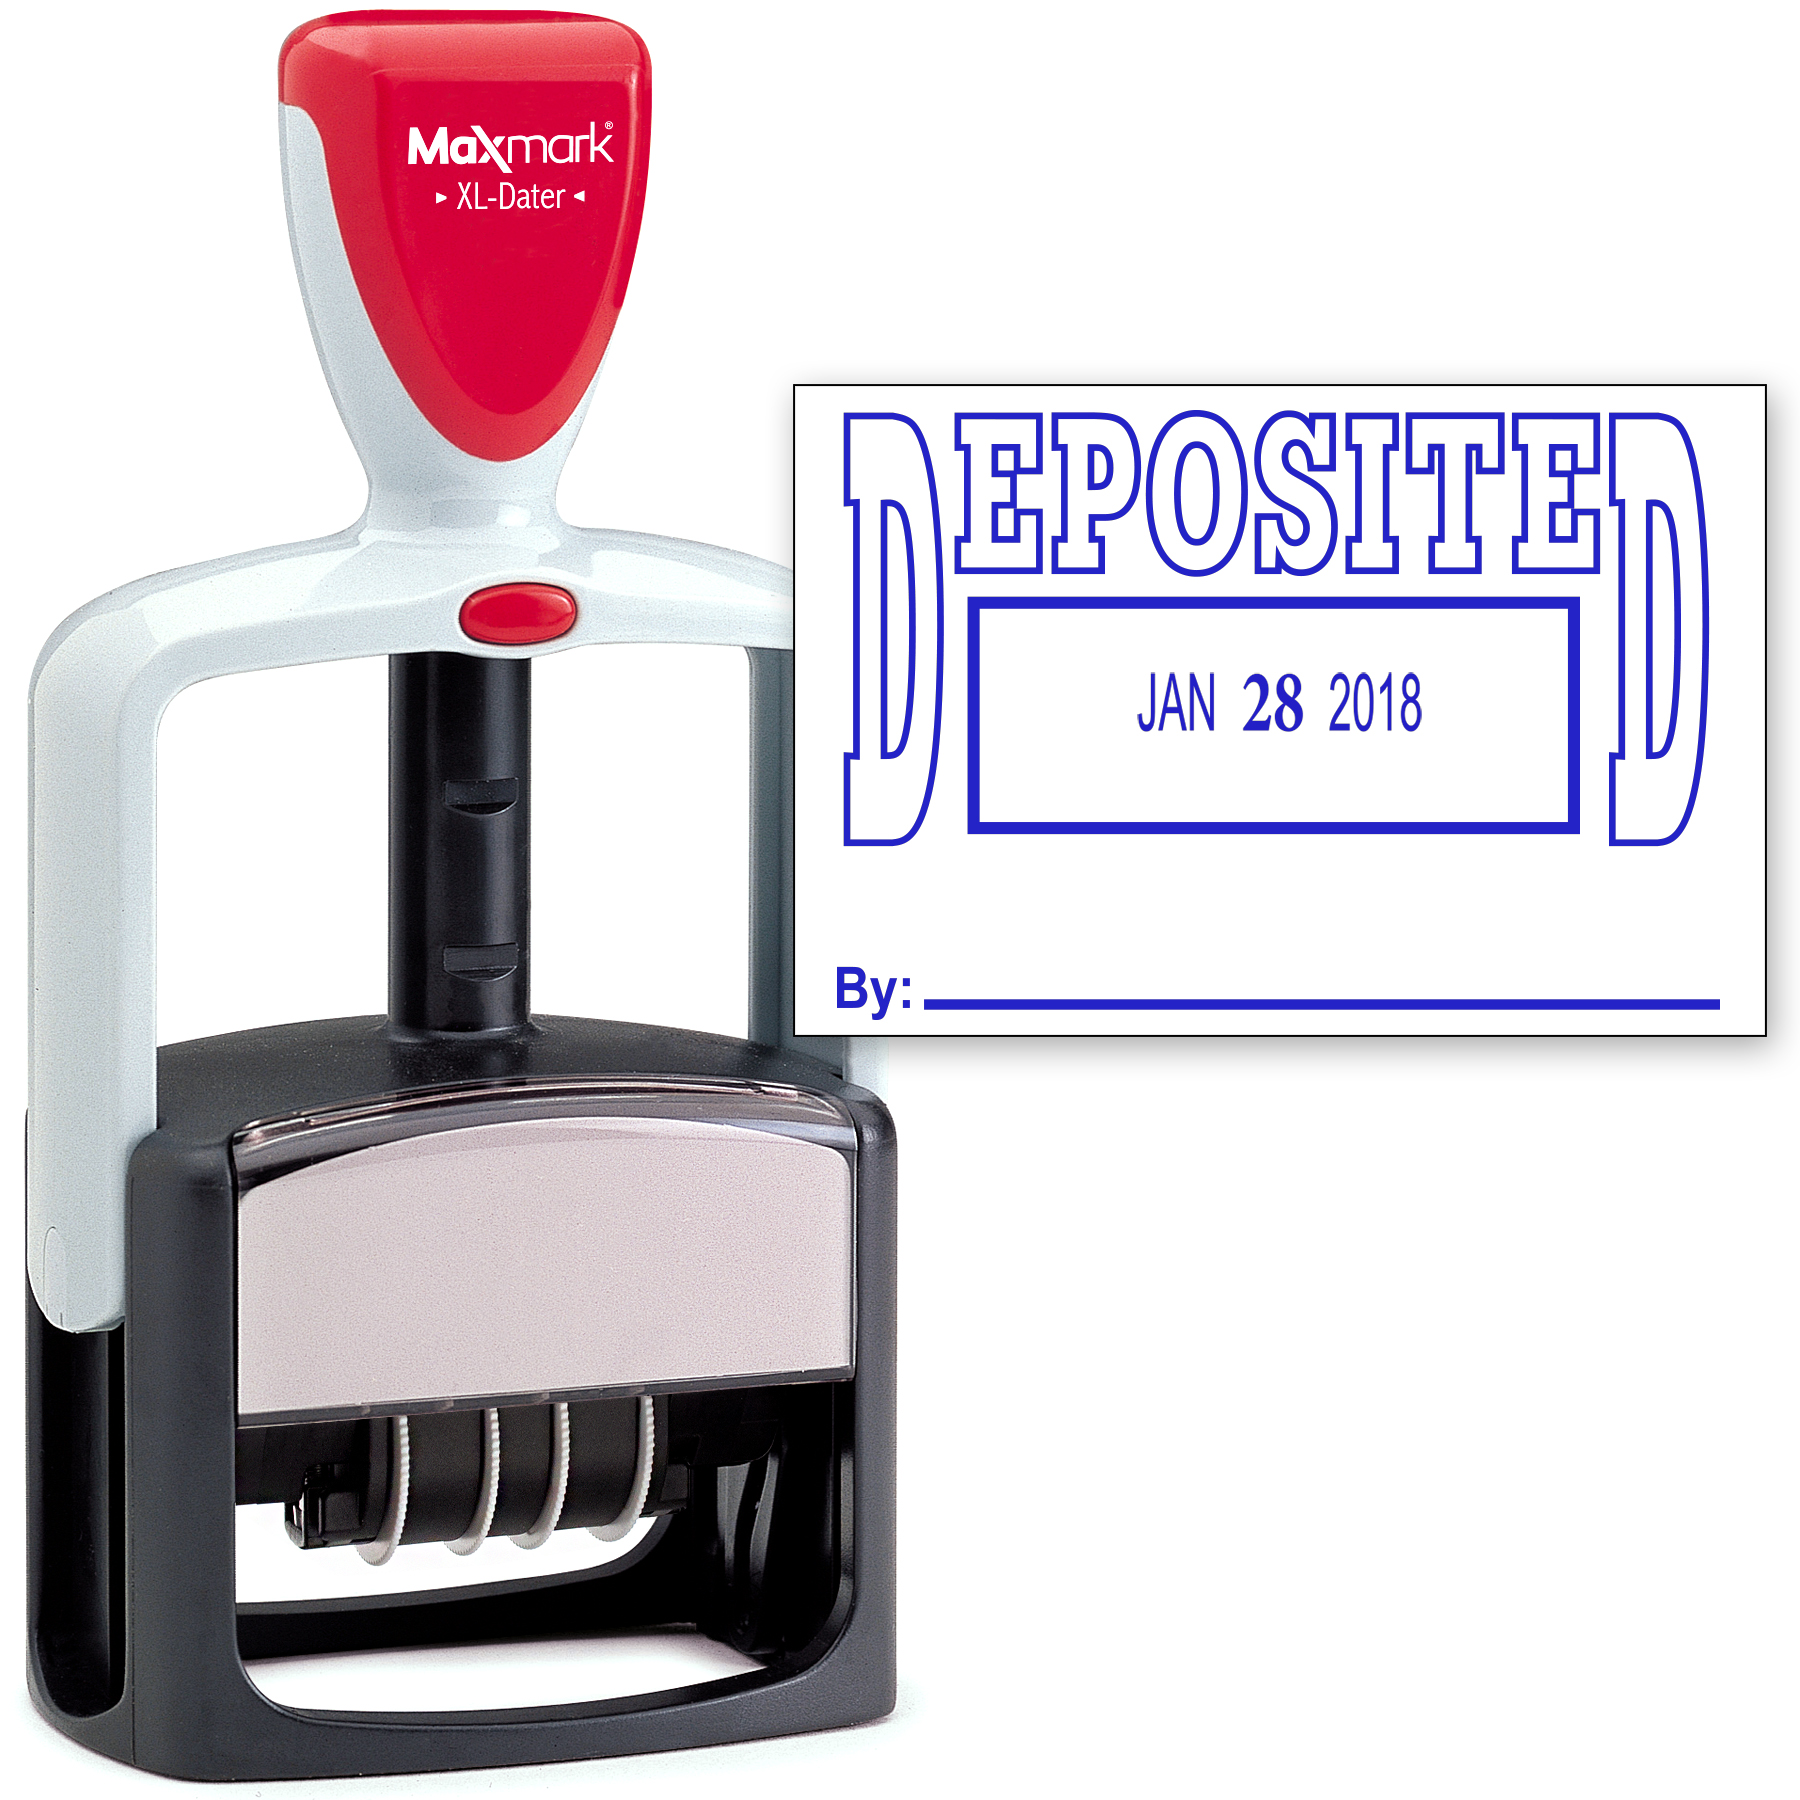 2000 PLUS Heavy Duty Style 2-Color Date Stamp with DEPOSITED self inking stamp - Blue Ink